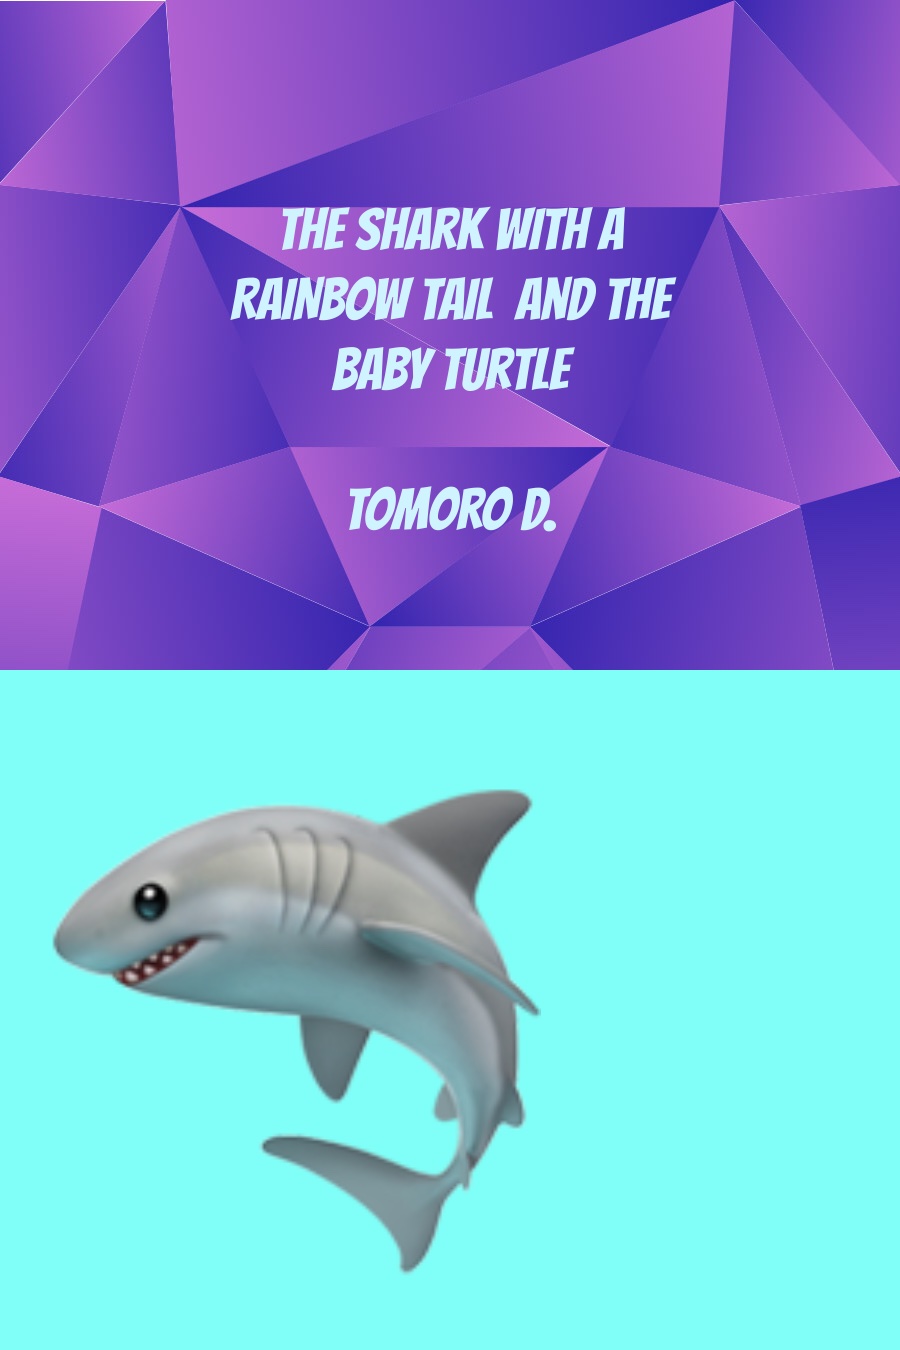 The Shark With the Rainbow Tail and The Baby Turtle by Tomoro D